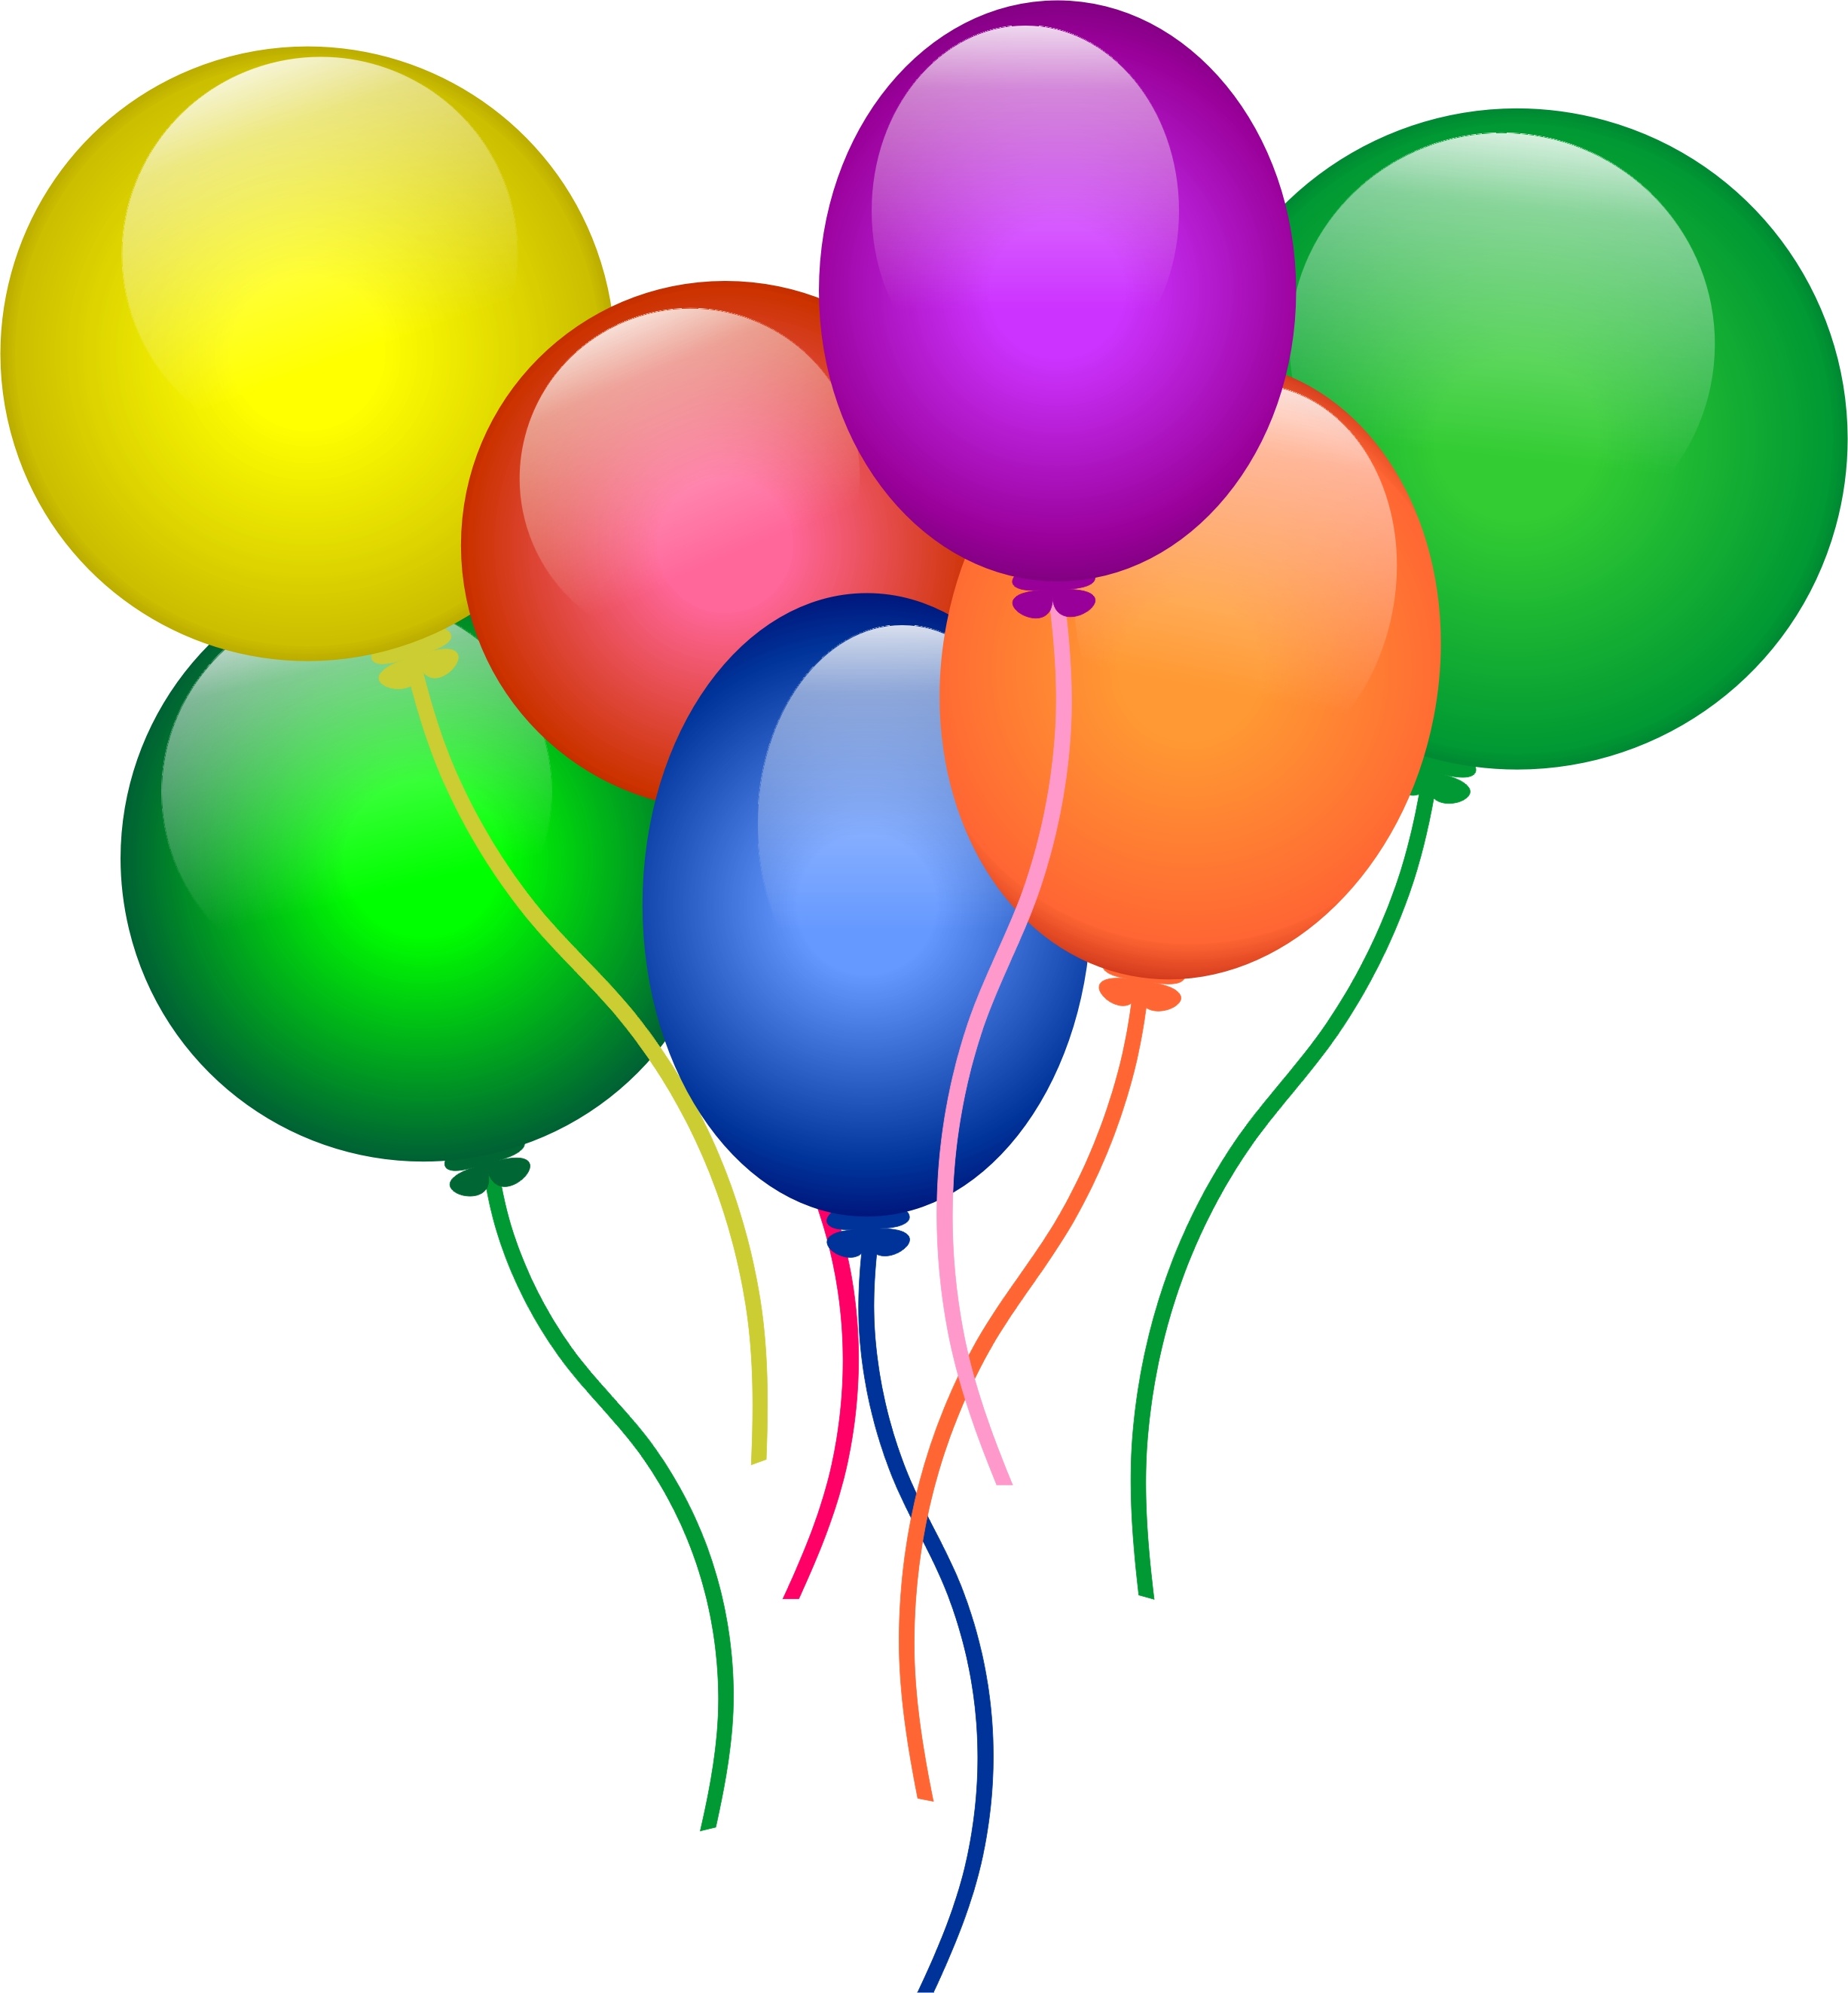 Free Ballons Png, Download Free Ballons Png png images, Free ClipArts